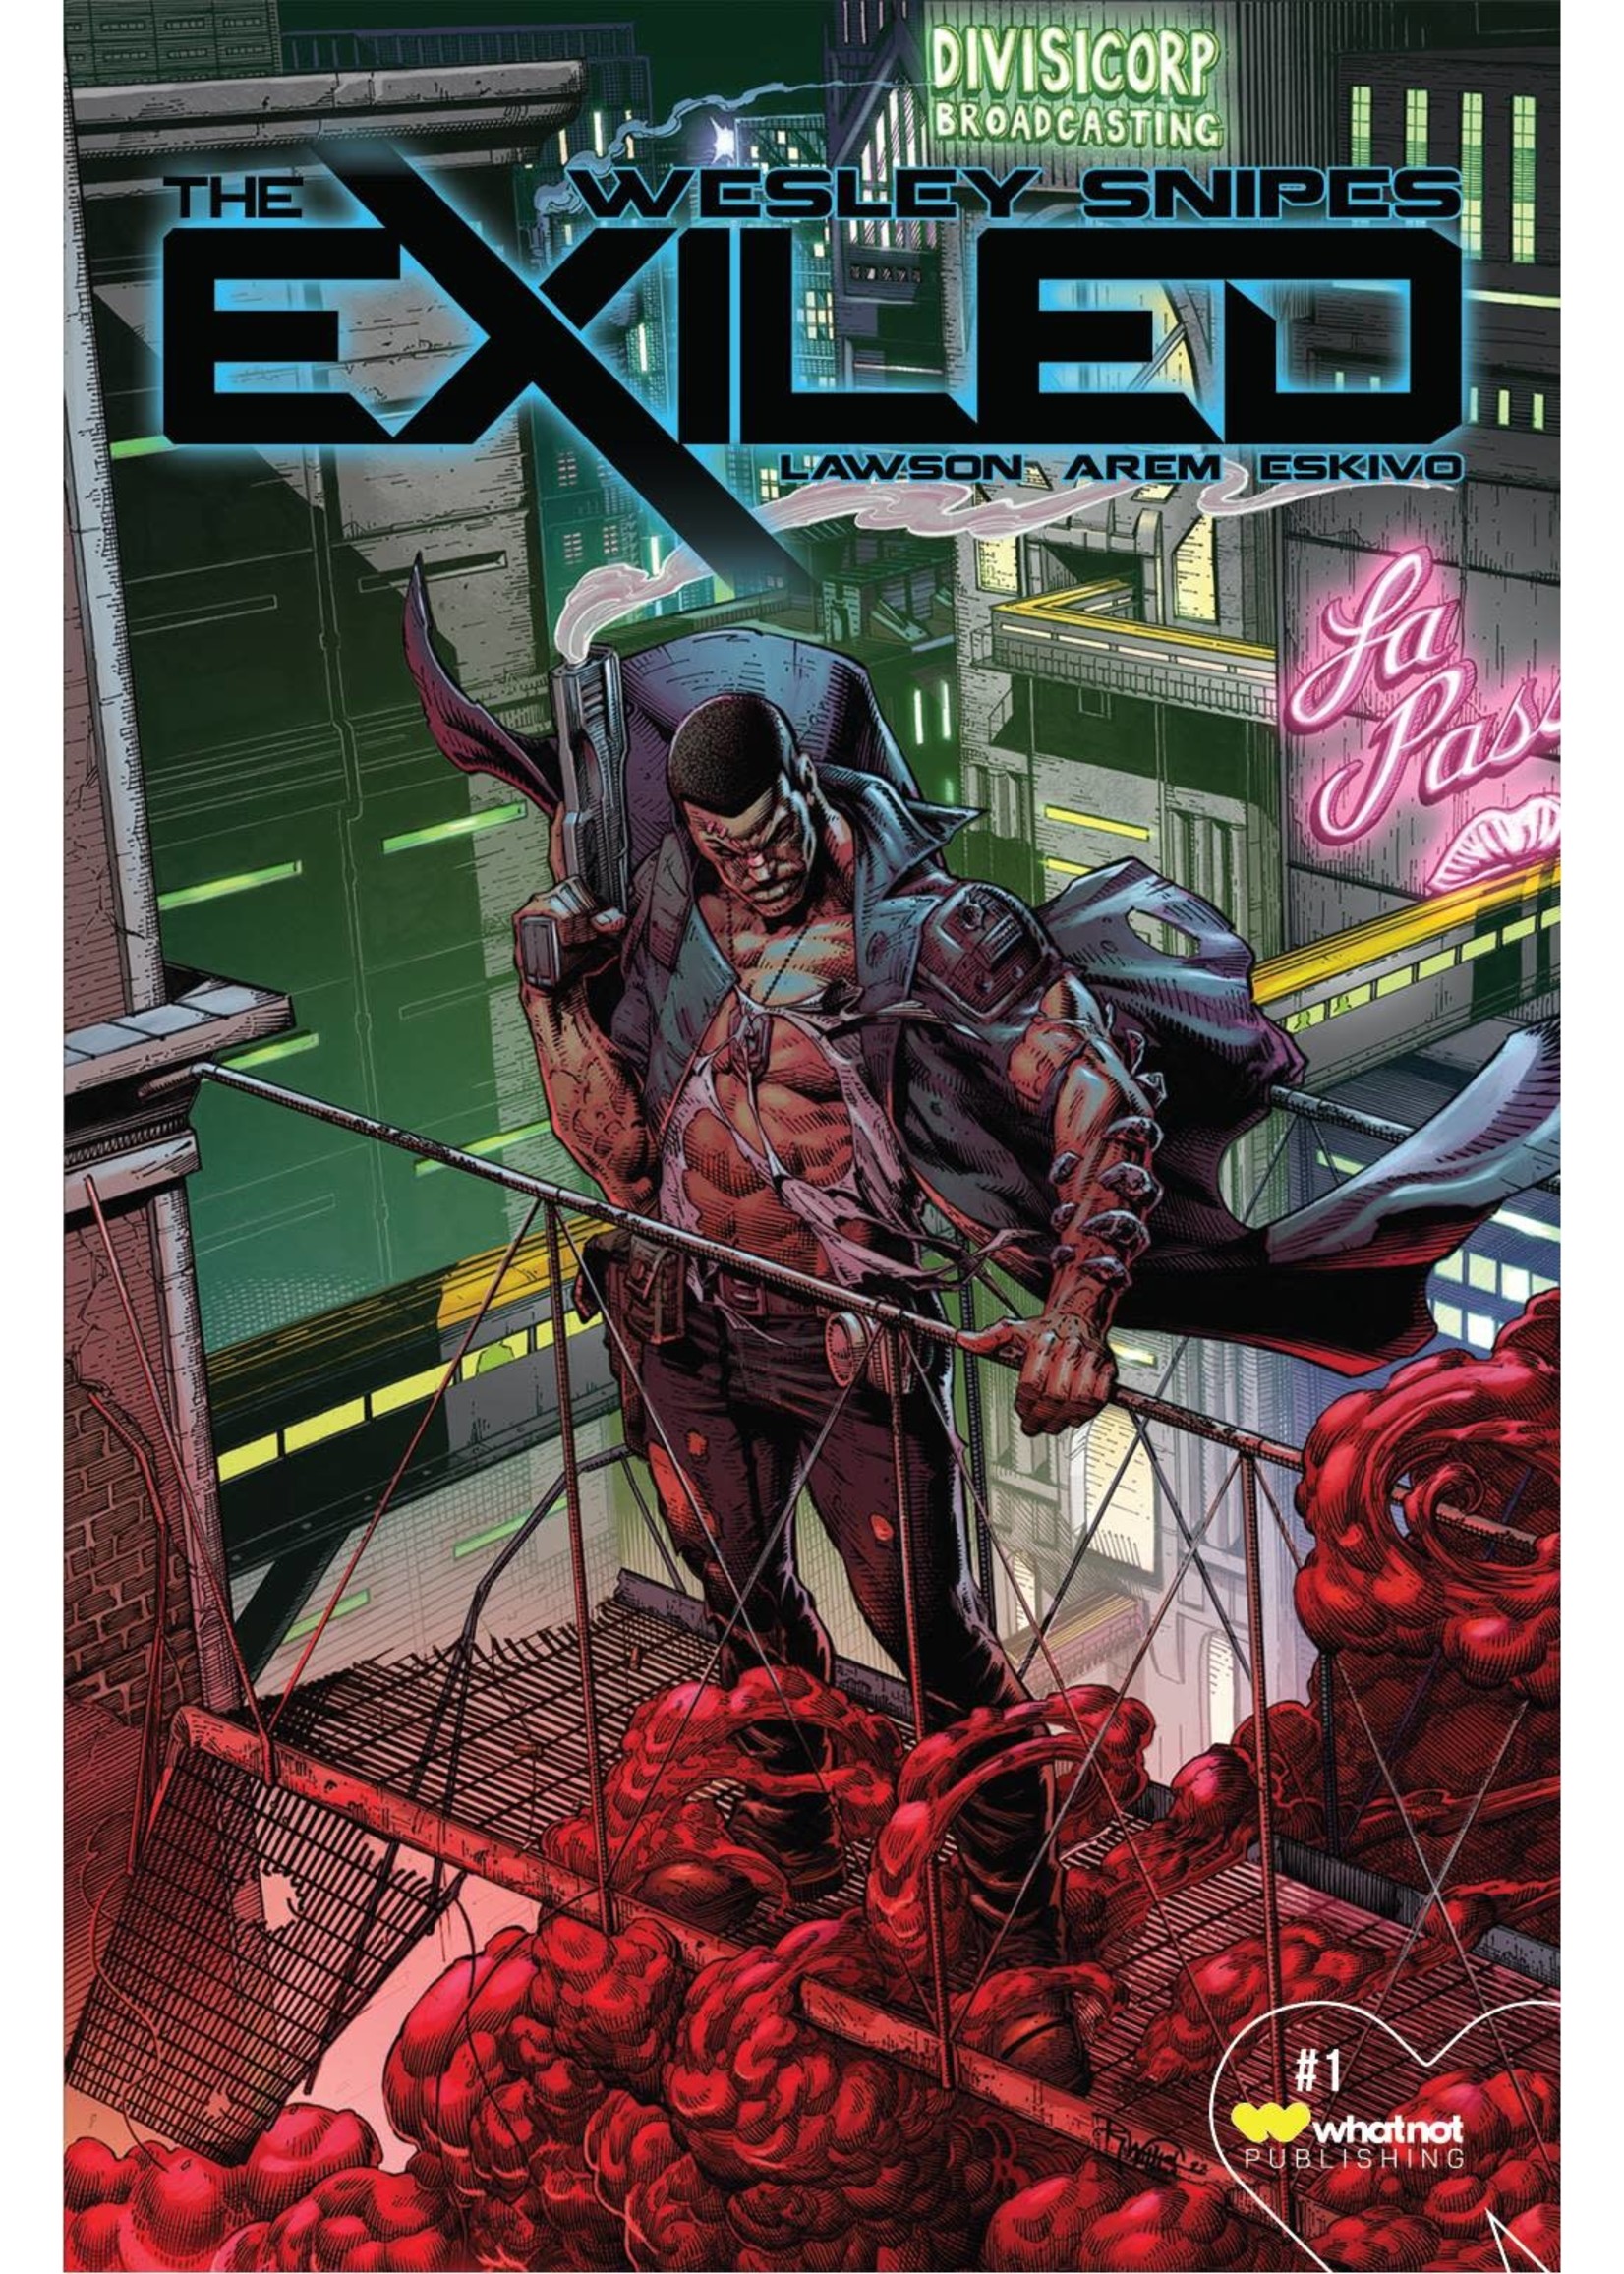 WHATNOT PUBLISHING THE EXILED #1 (OF 6) CVR A WILLIS (MR)